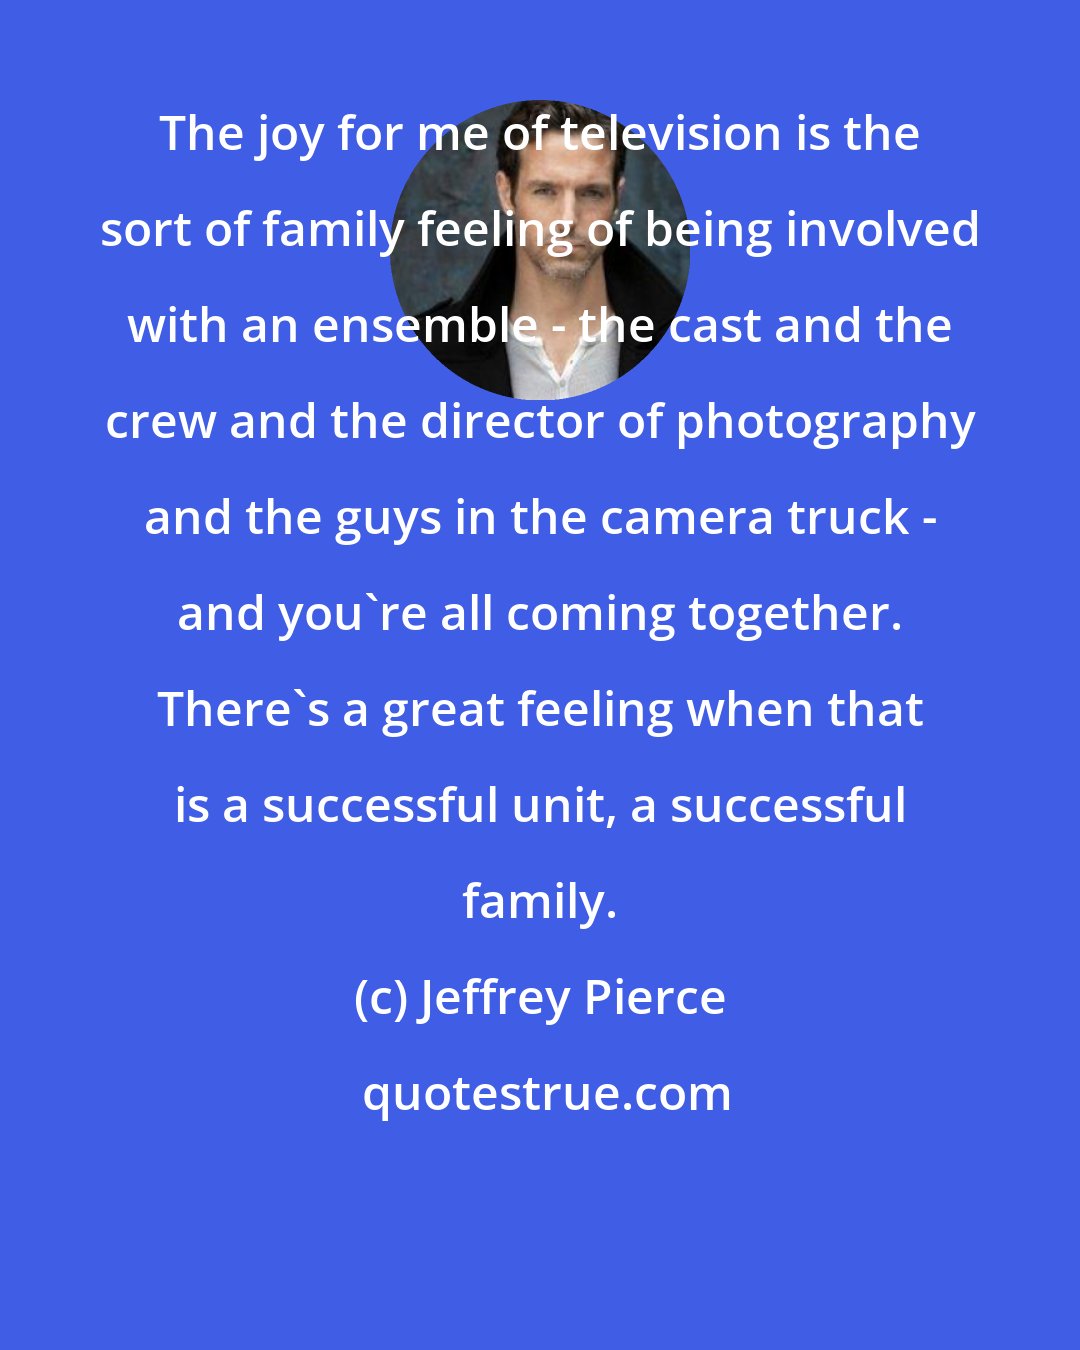 Jeffrey Pierce: The joy for me of television is the sort of family feeling of being involved with an ensemble - the cast and the crew and the director of photography and the guys in the camera truck - and you're all coming together. There's a great feeling when that is a successful unit, a successful family.